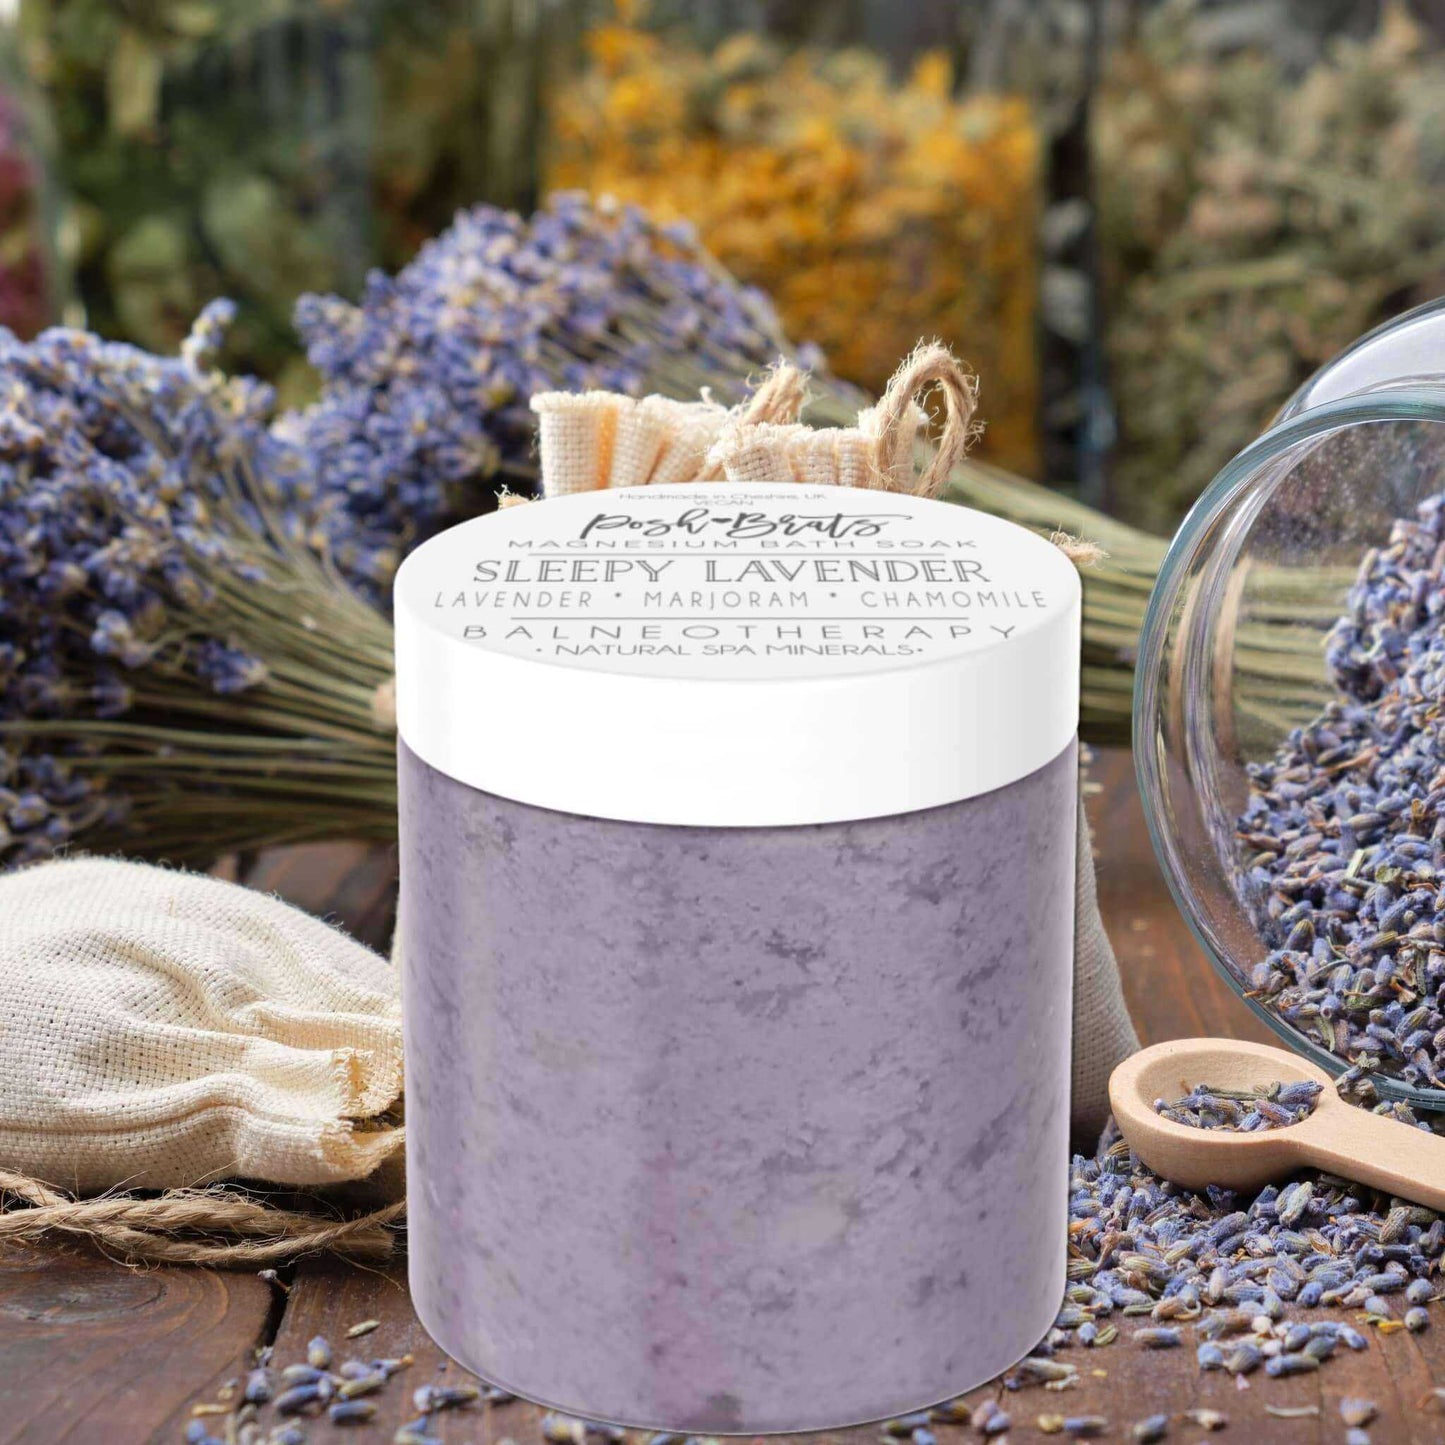 Discover tranquility with Sleepy Lavender Bath Salt enriched with soothing magnesium sea mineral. A restful sleep awaits you.